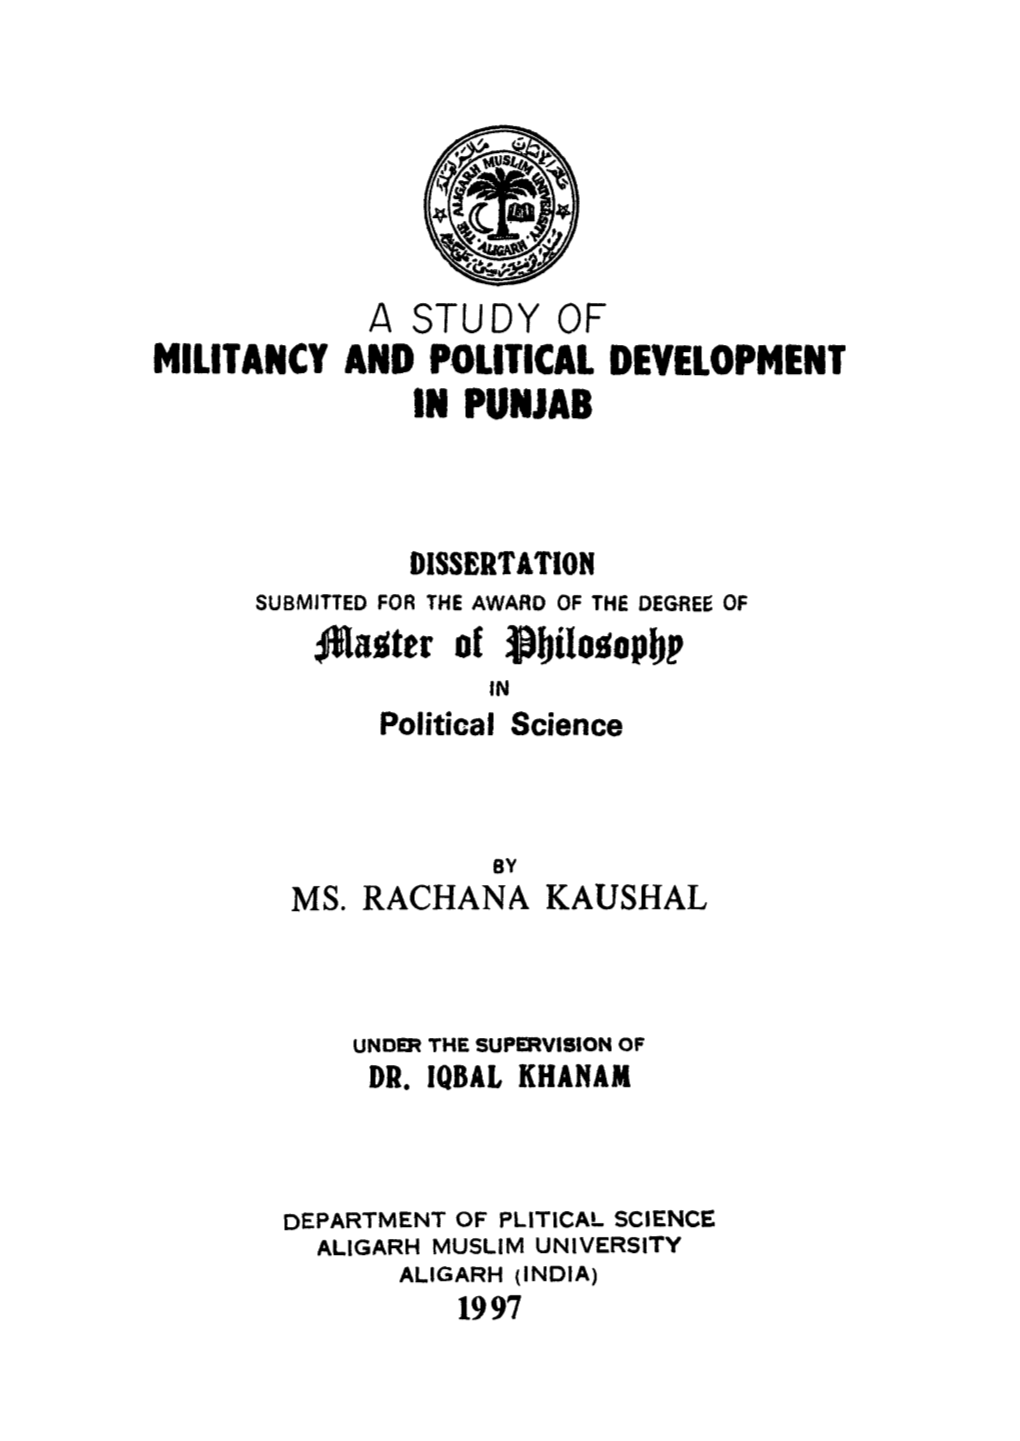 A Study of Militancy and Political Development in Punjab